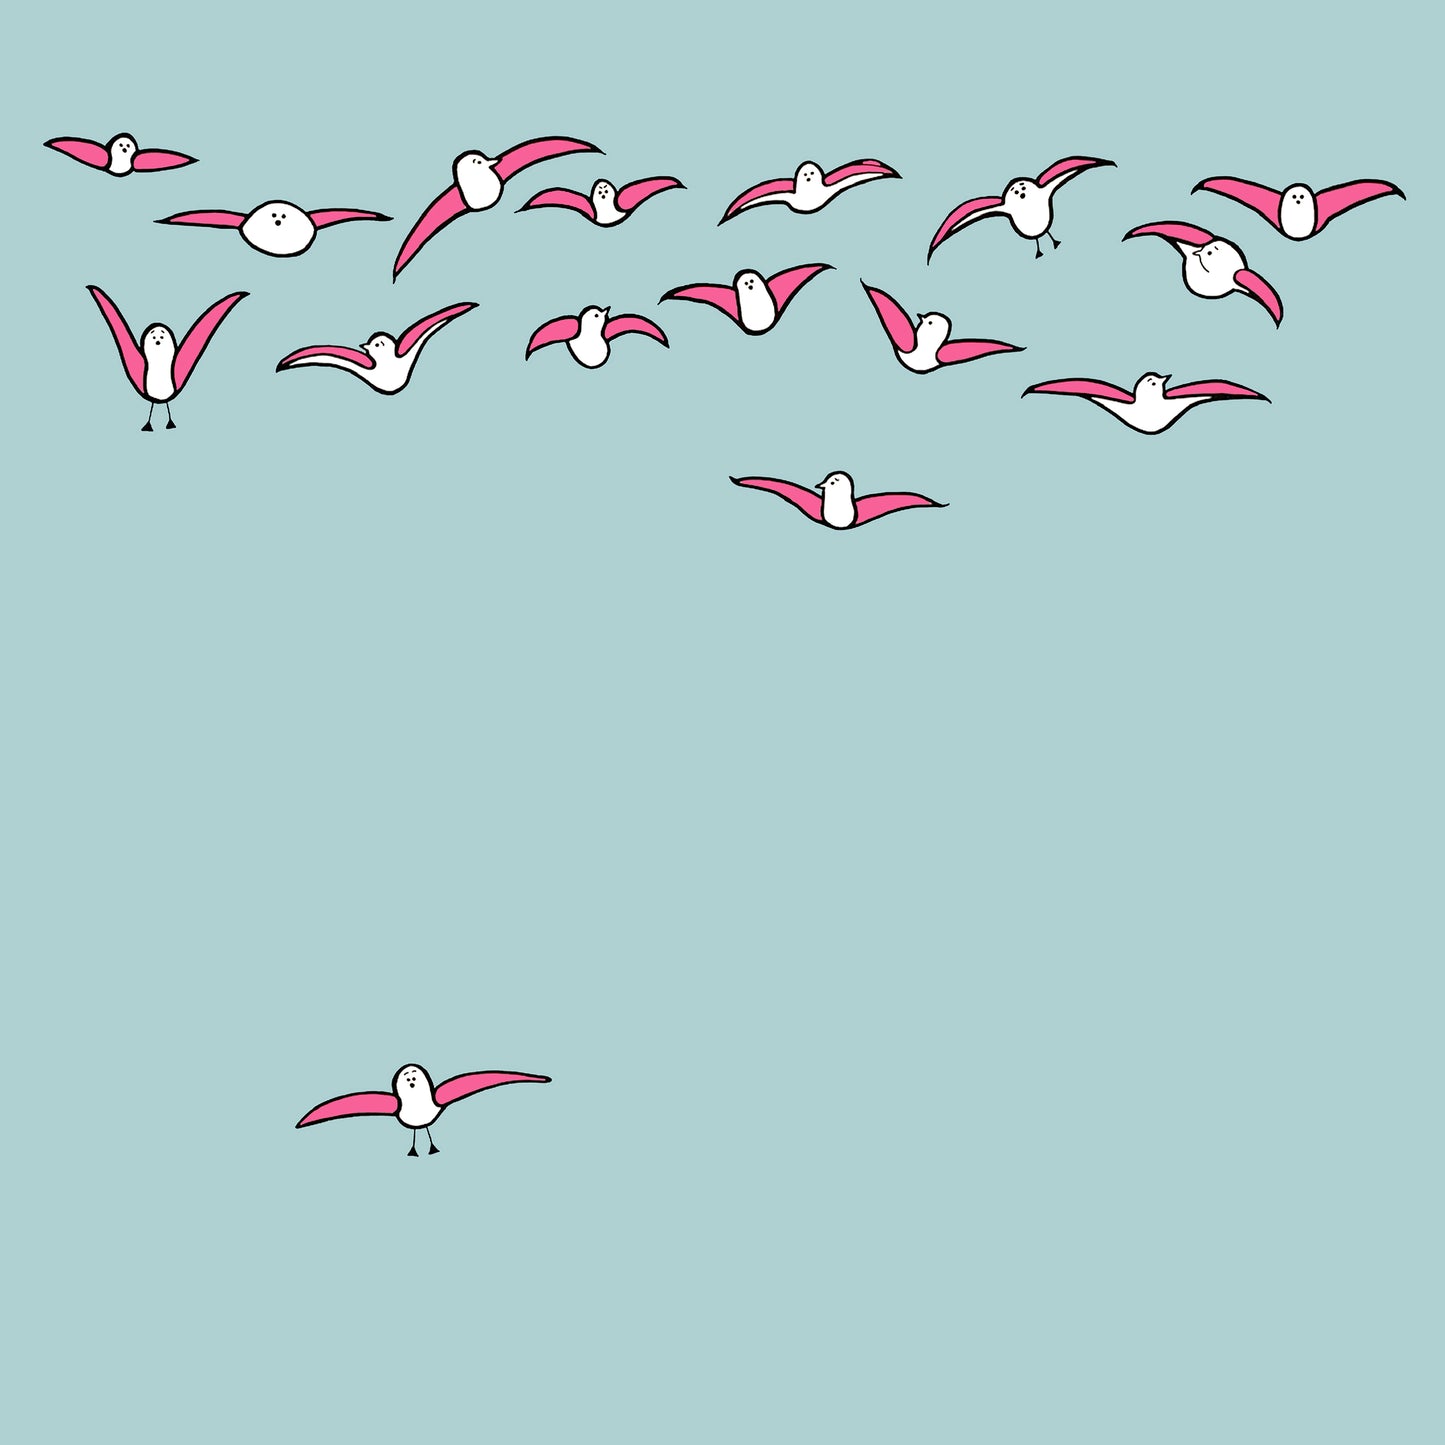 Detail of the original artwork print with a large group of pink winged seagulls flying in the sky with one pink seagull flying on its own at the bottom. The sky is a pale blue green